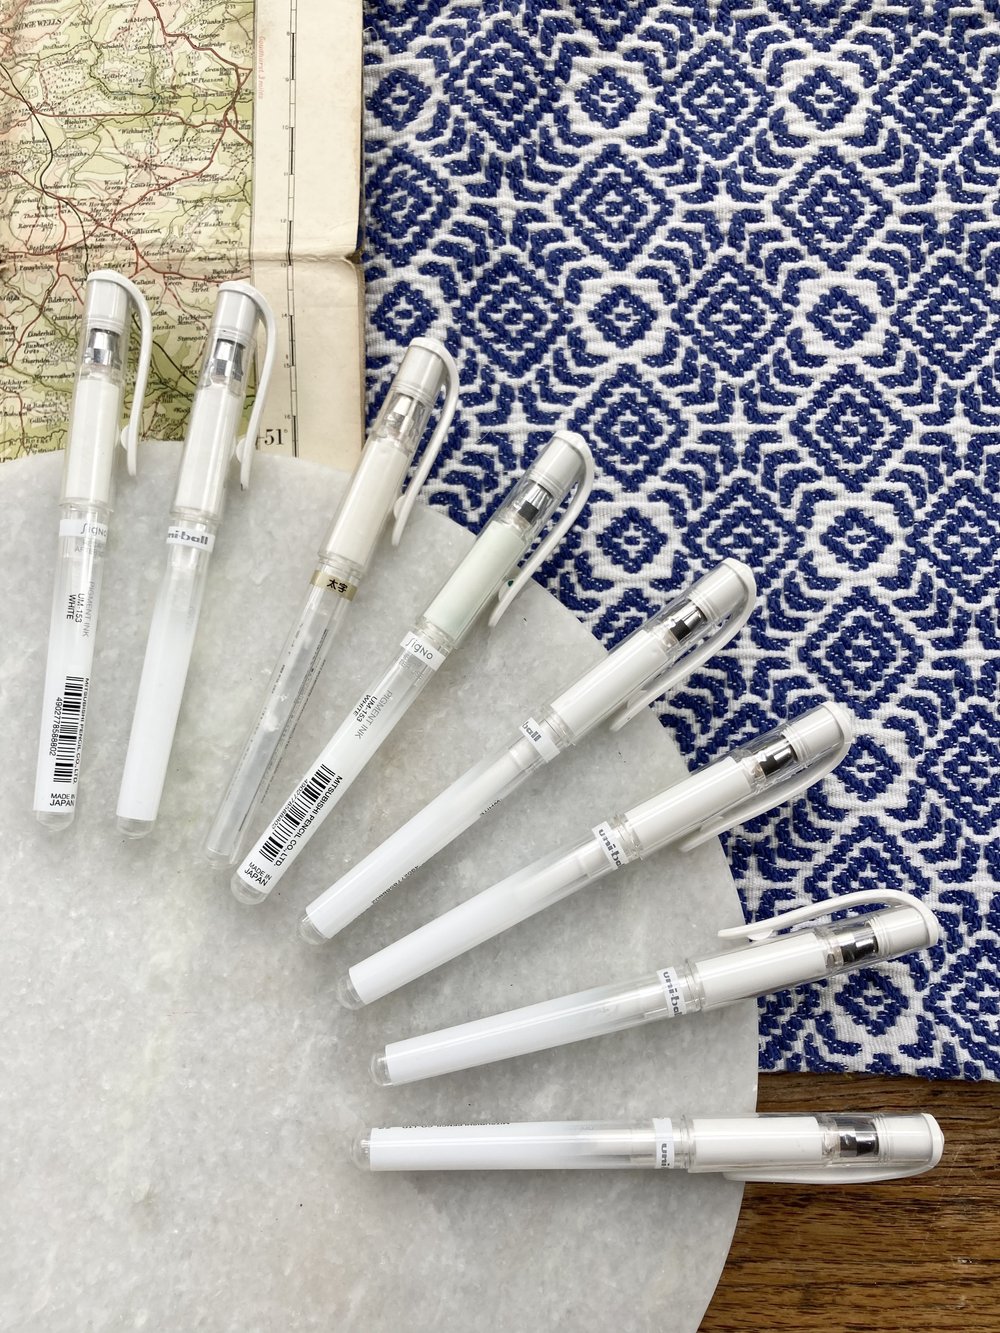 The Best (and Worst) White Pens for Drawing: The Ultimate White Pen Test!